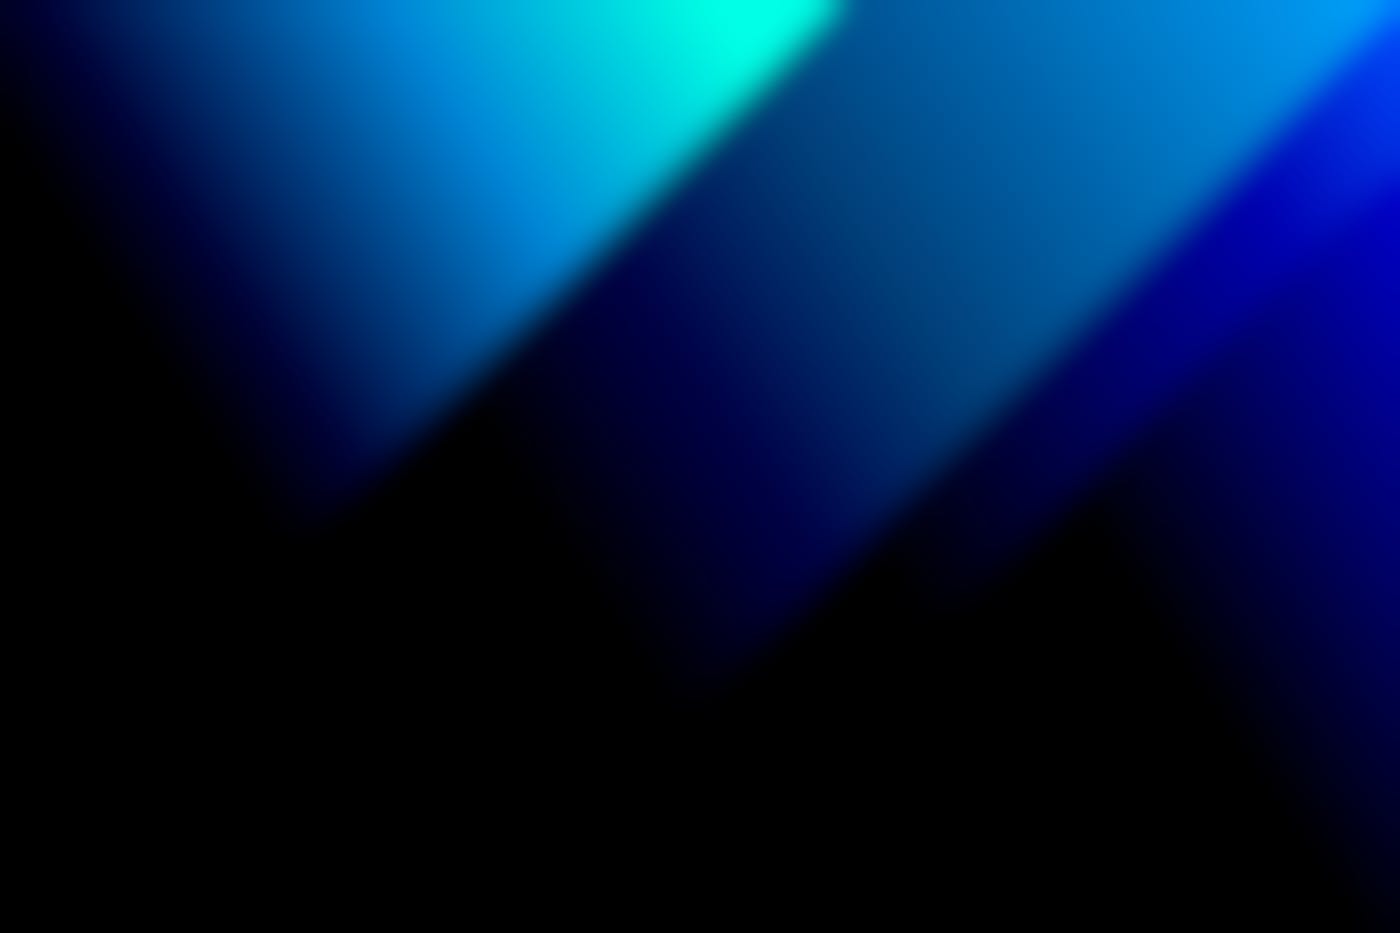 An abstract blue and black background